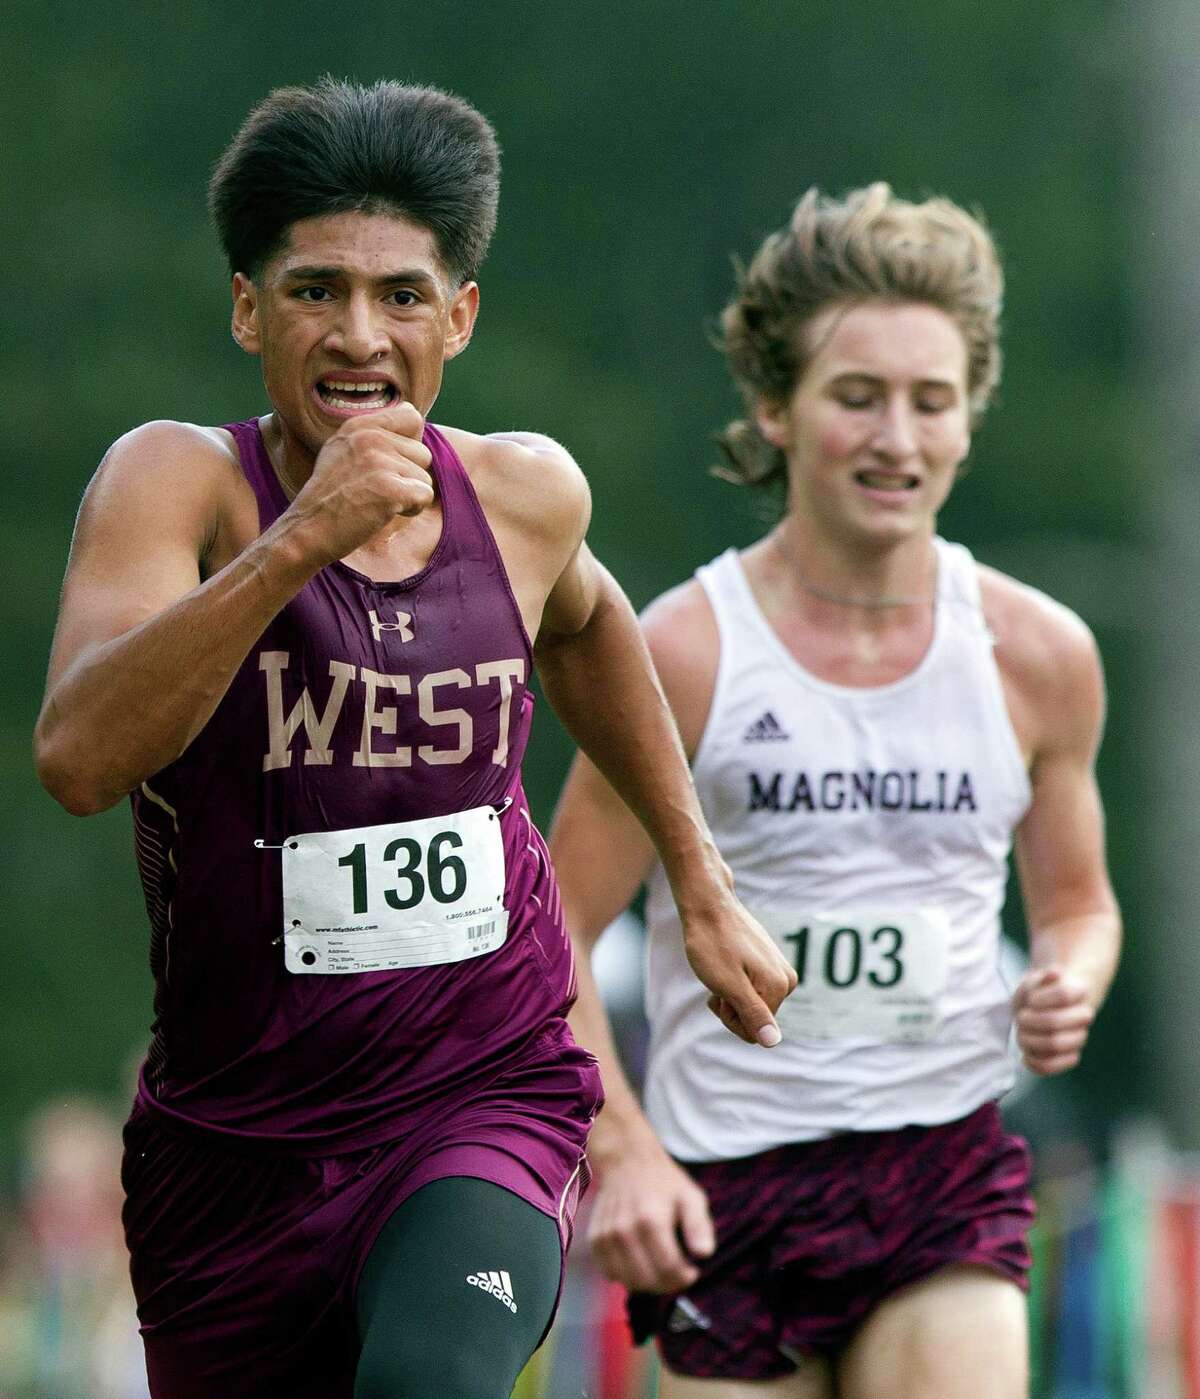 Magnolia West's Jonathan Gomez, left, competes against Magnolia's Brendan Gilbert during the District 20-5A varsity boys high school cross country meet at Camp Misty Meadows Thursday, Oct. 20, 2016, in Conroe.